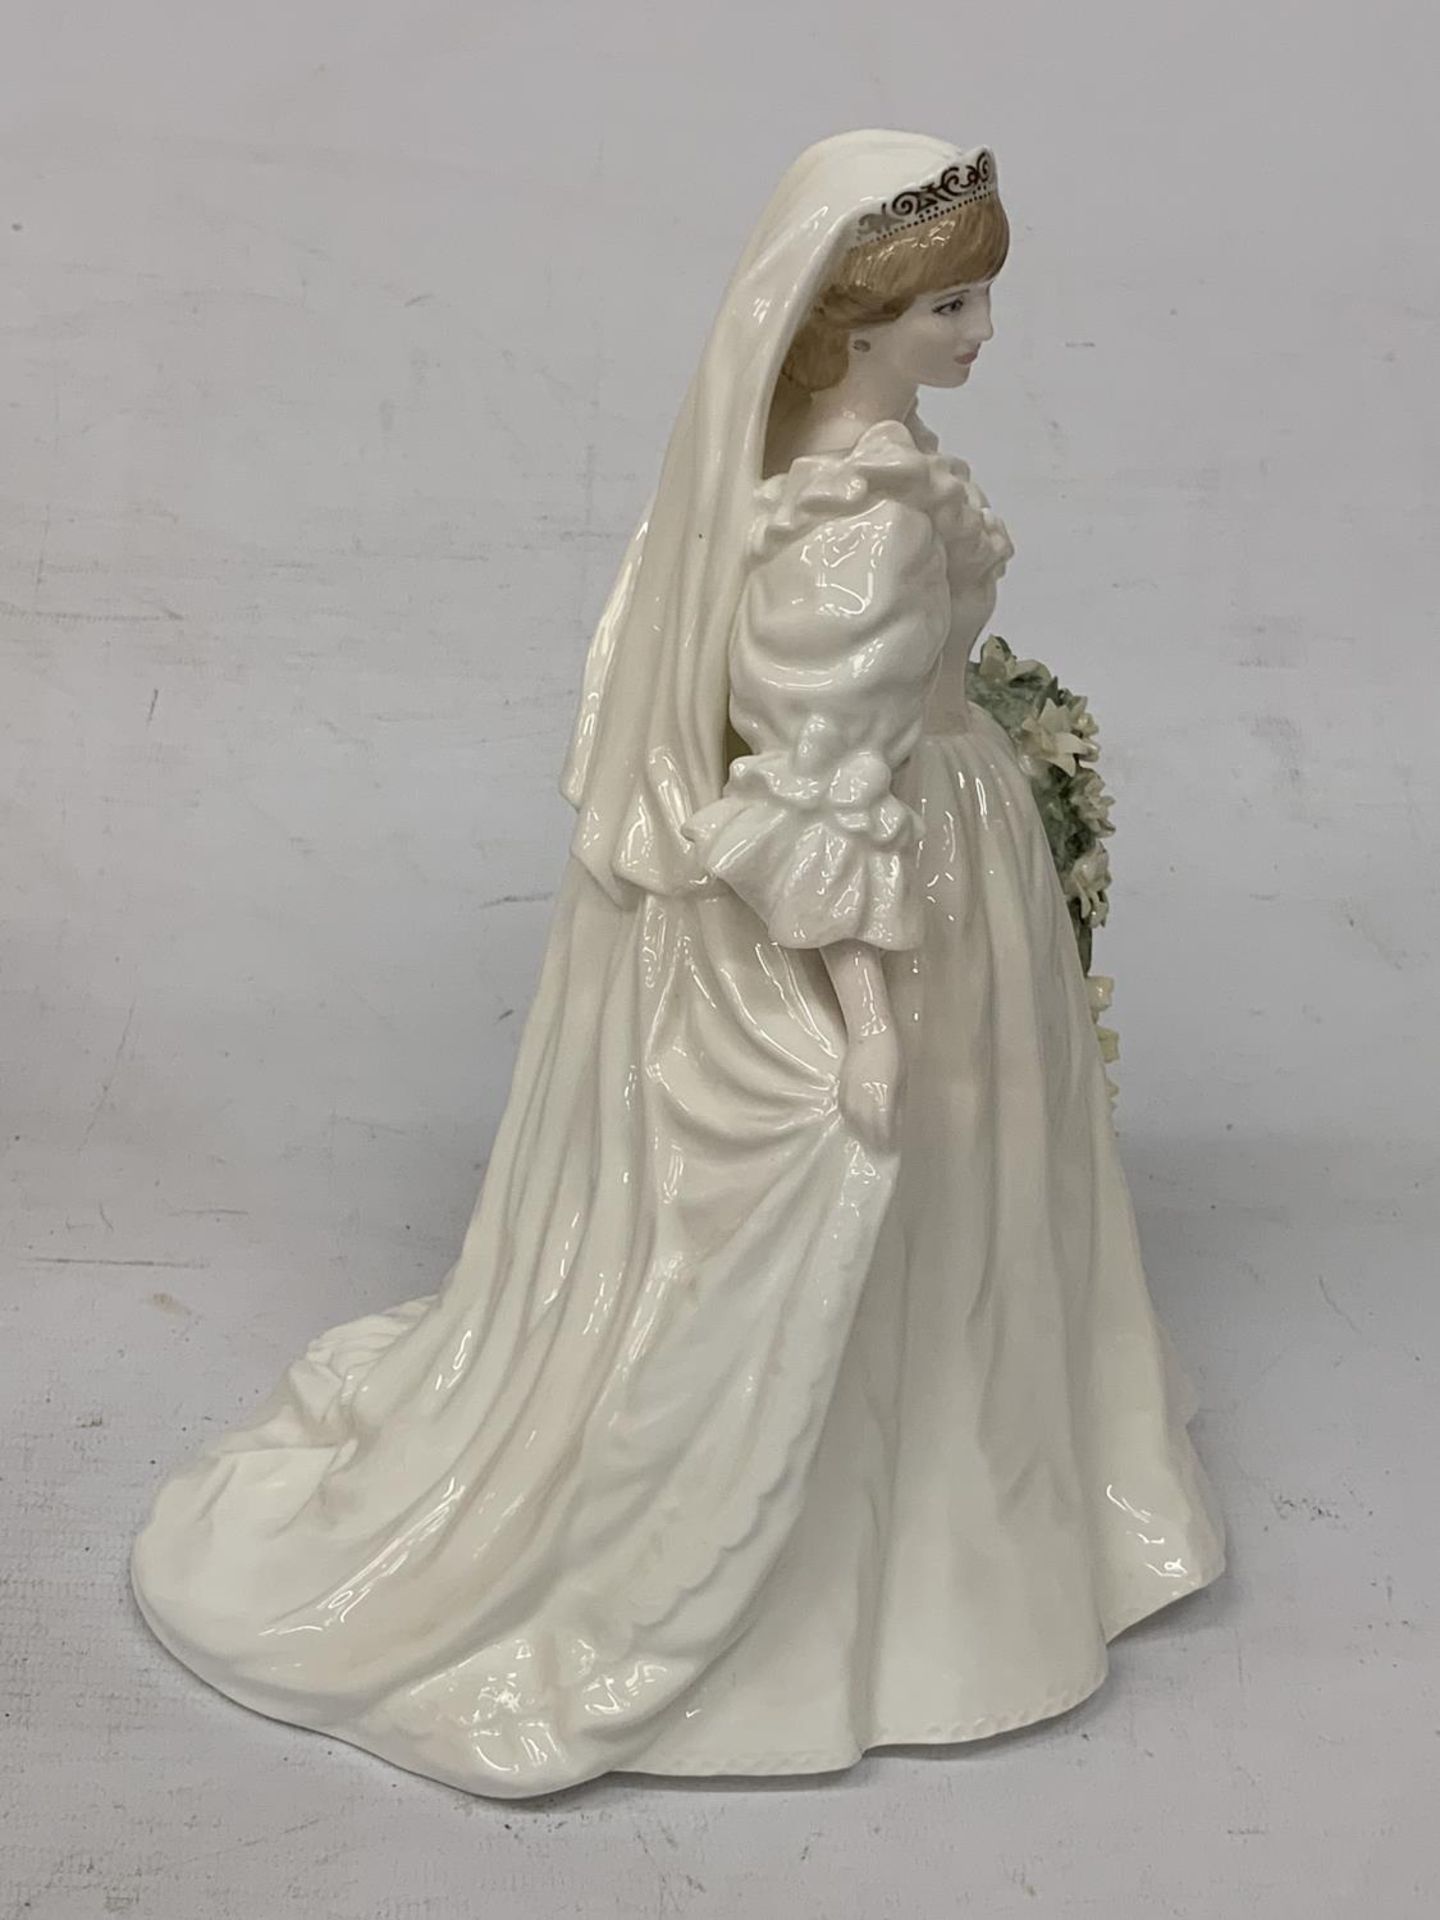 A DIANA FIGURINE PRINCESS OF WALES 29TH JULY 1981 ISSUED IN A HAND-NUMBERED UK LIMITED EDITION OF - Image 2 of 5